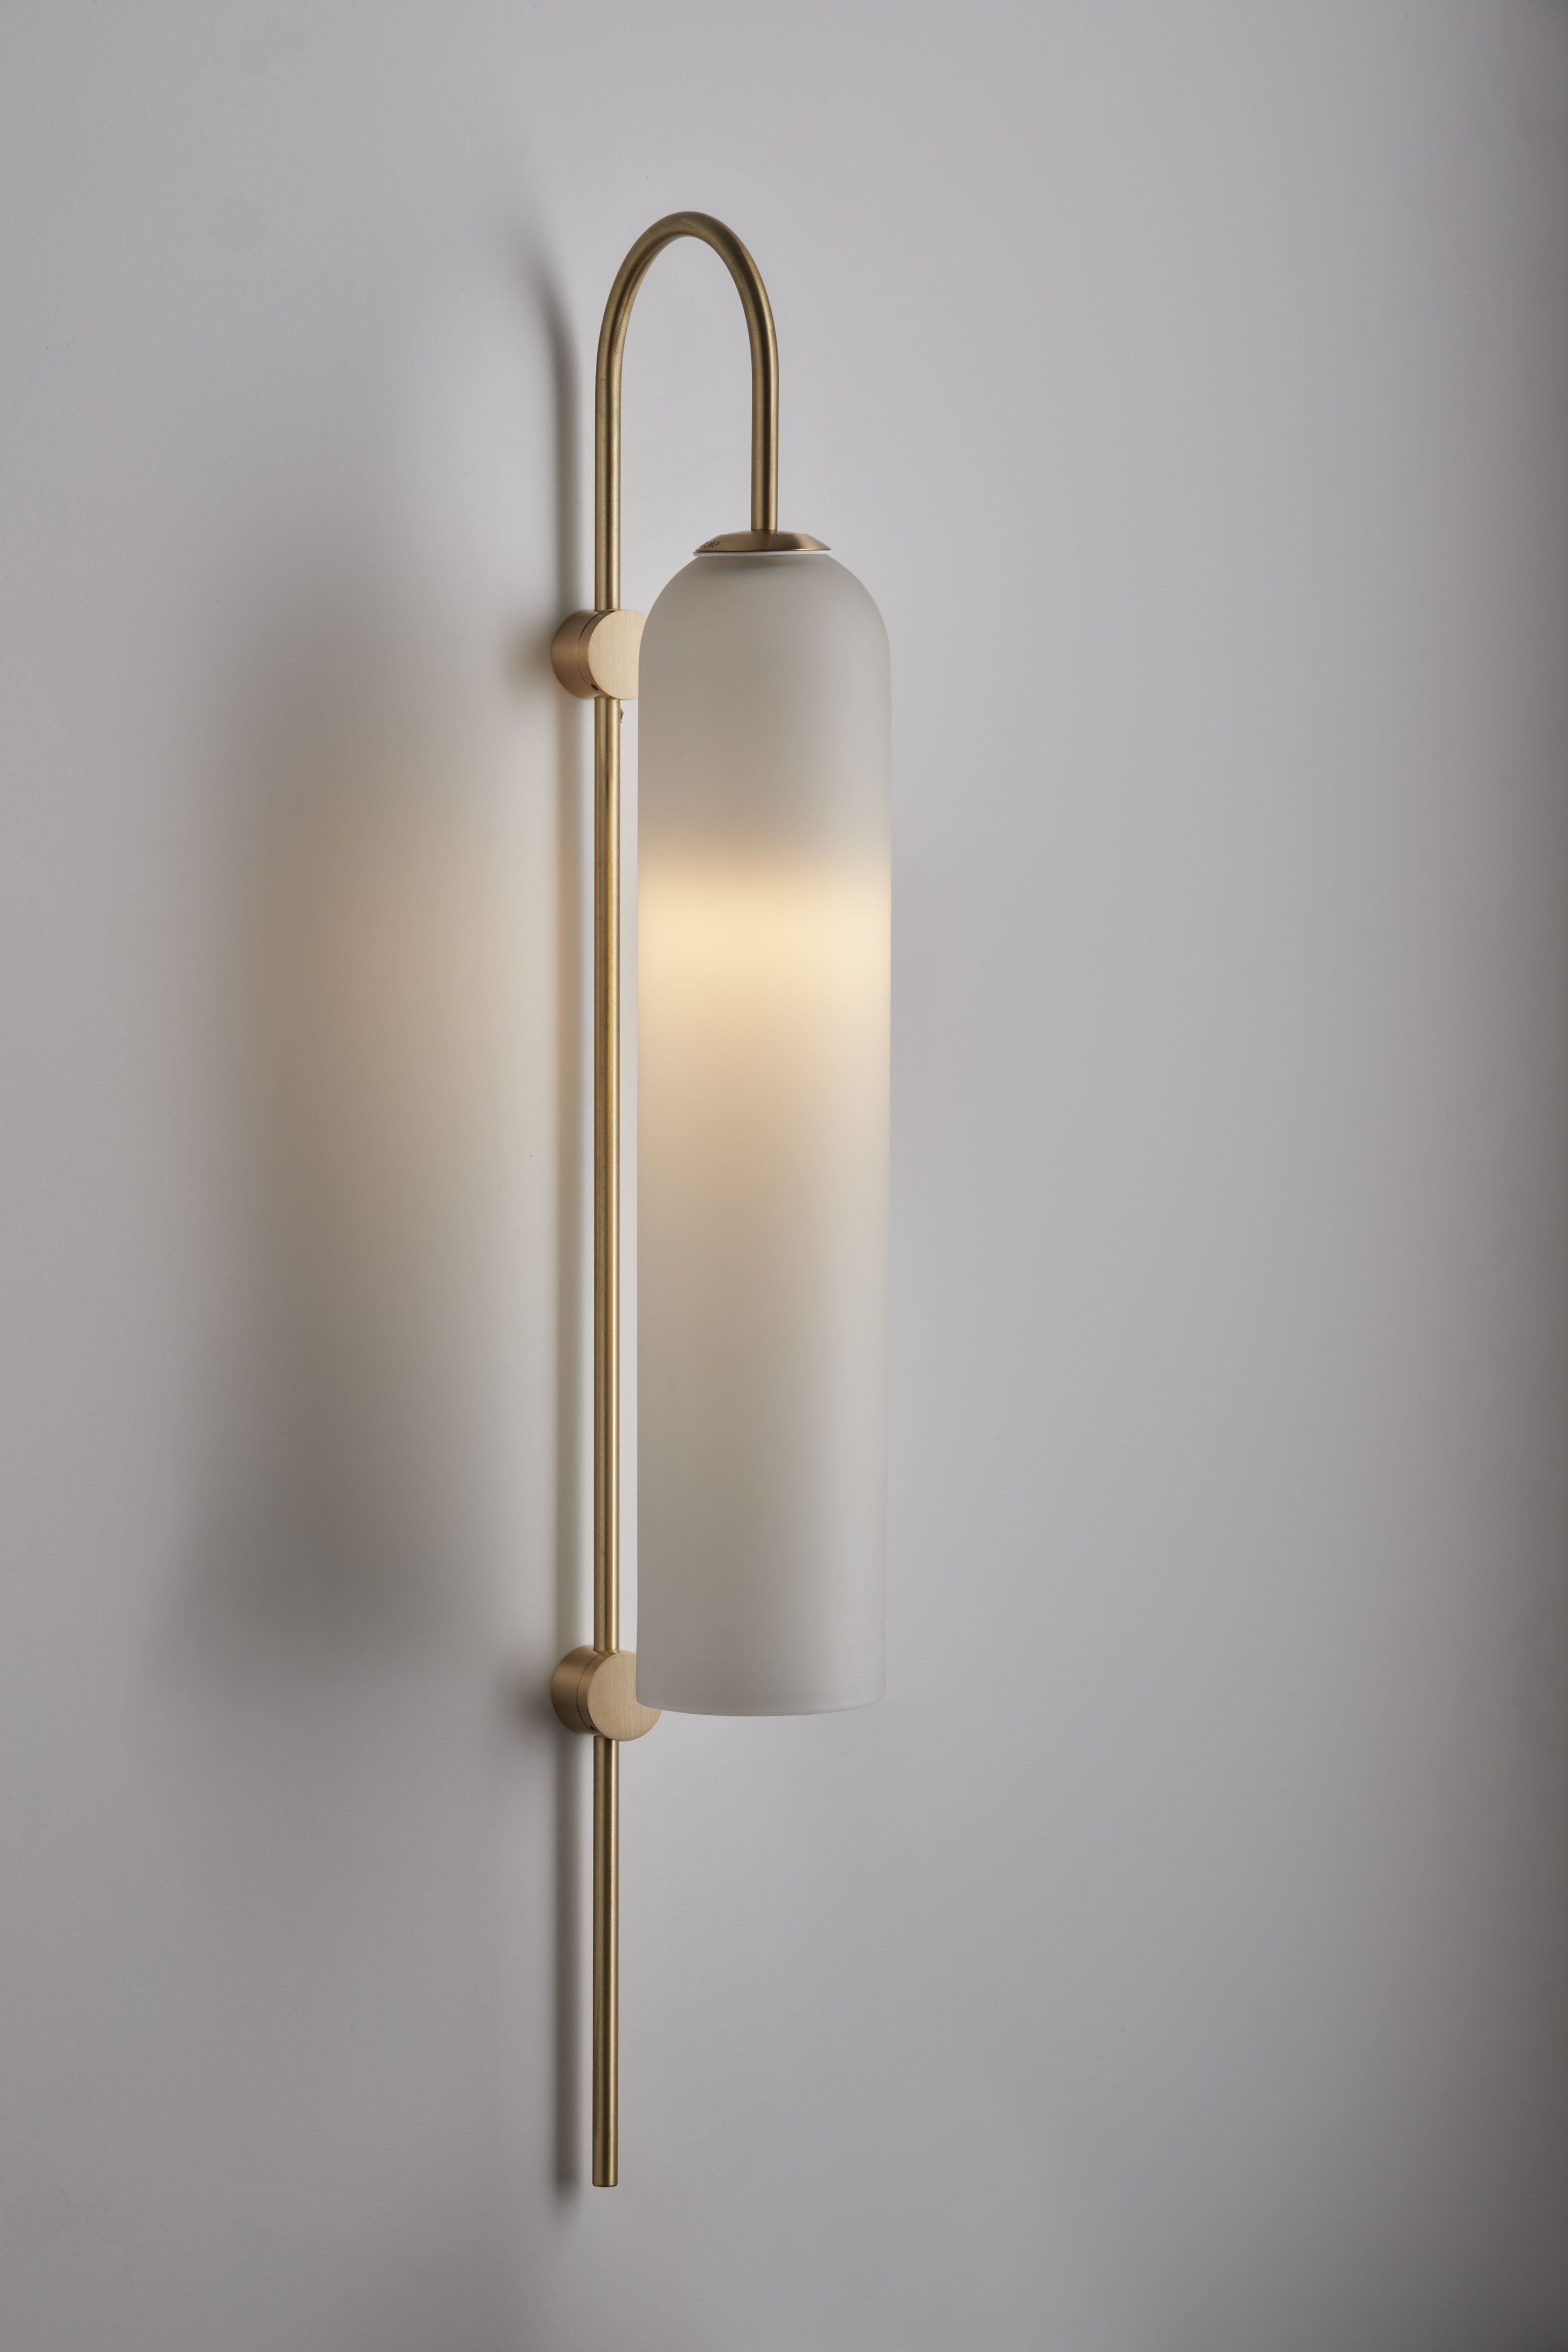 Bedroom Wall Light Fixtures Lovely Articolo Float Wall Sconce Brass Rod and Fitting with Snow